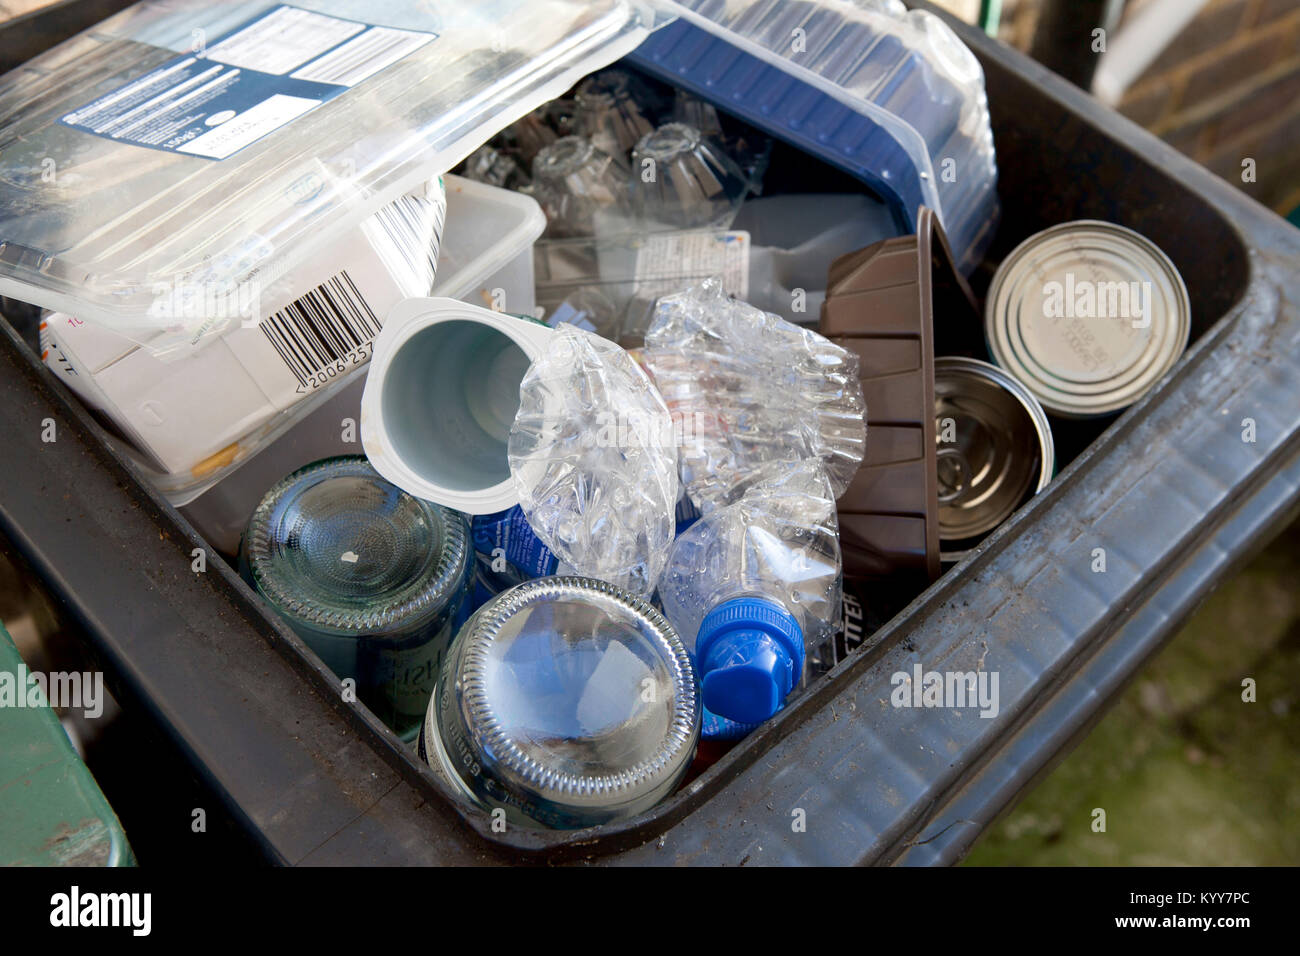 Wheelie bin full of domestic recycling waste, glass bottles, tin cans and plastic bottles, plastic waste, Recycling. Stock Photo